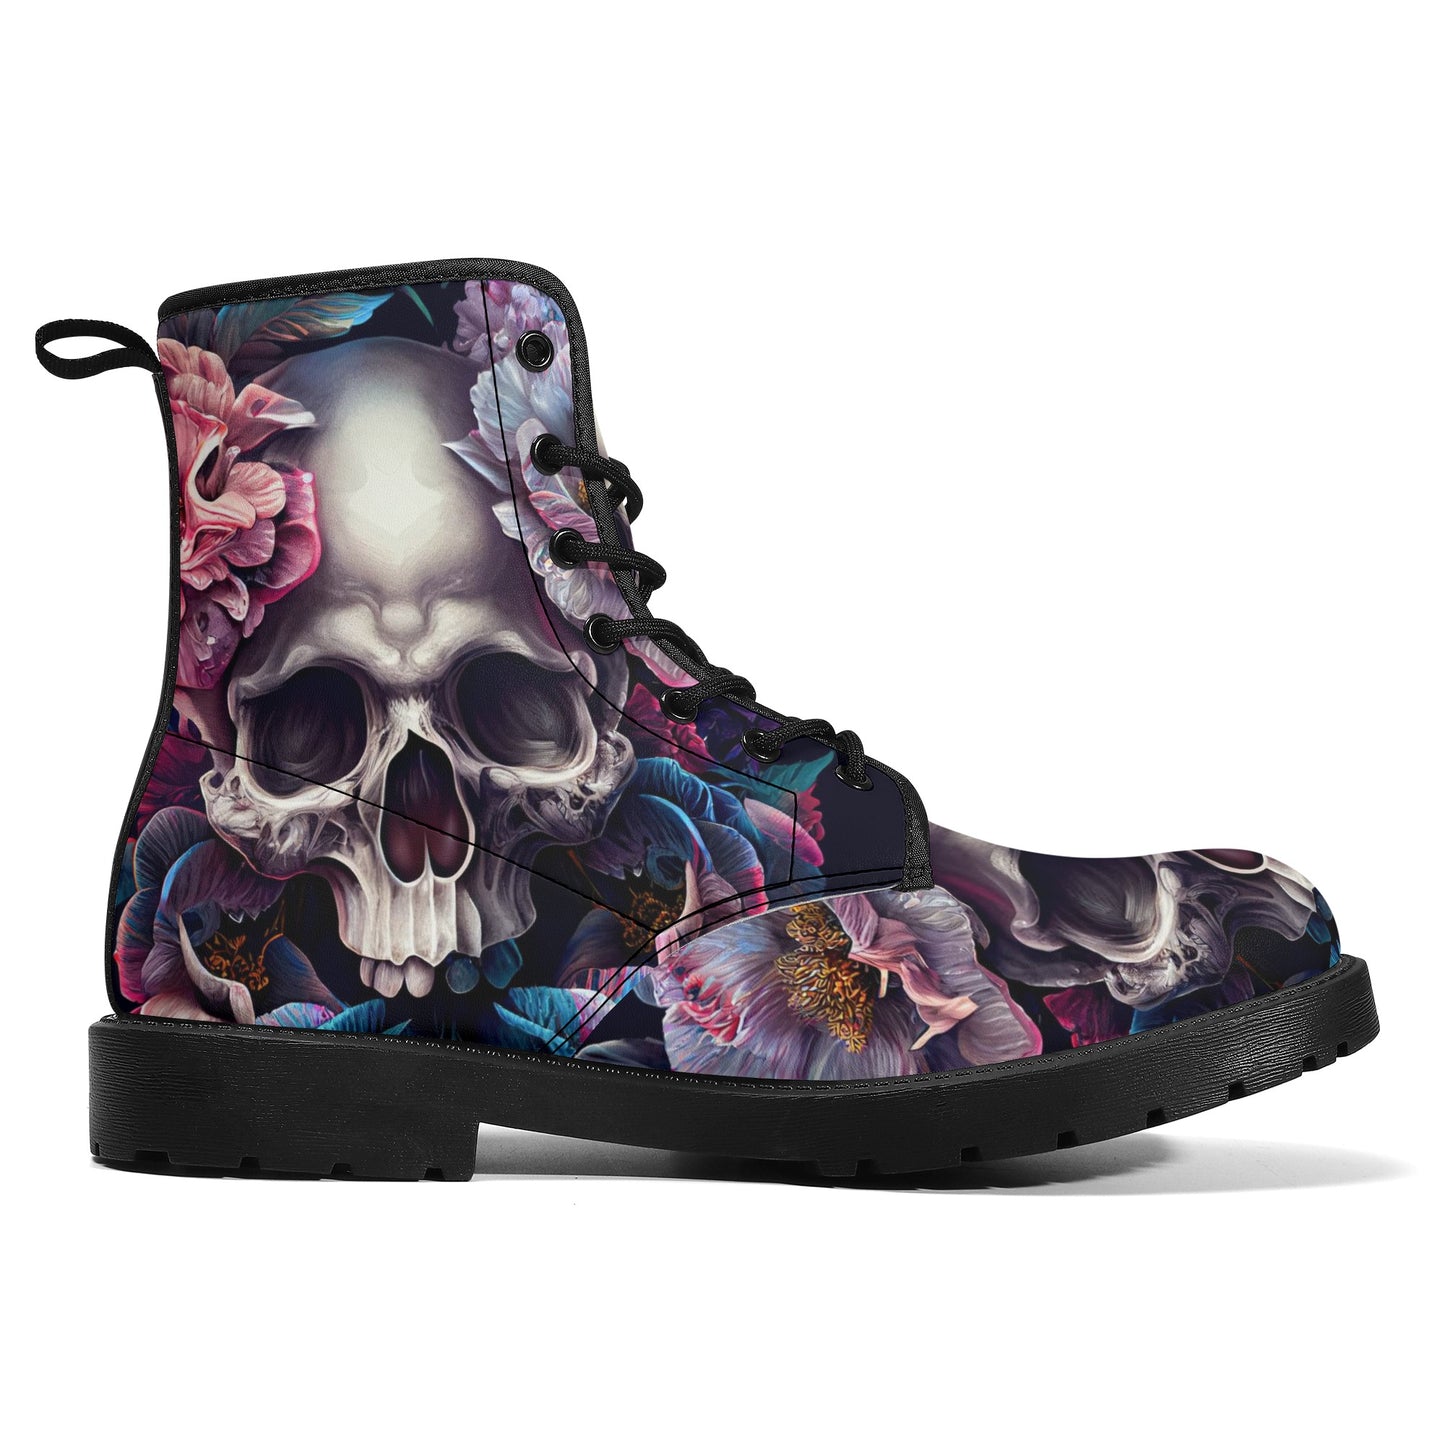 Gothic skull combat boots, death skull waterproof Lace Up Anti-Slip platform nooties, rose skull unisex shoes, flaming skull fashion leather Mens Leather Boots